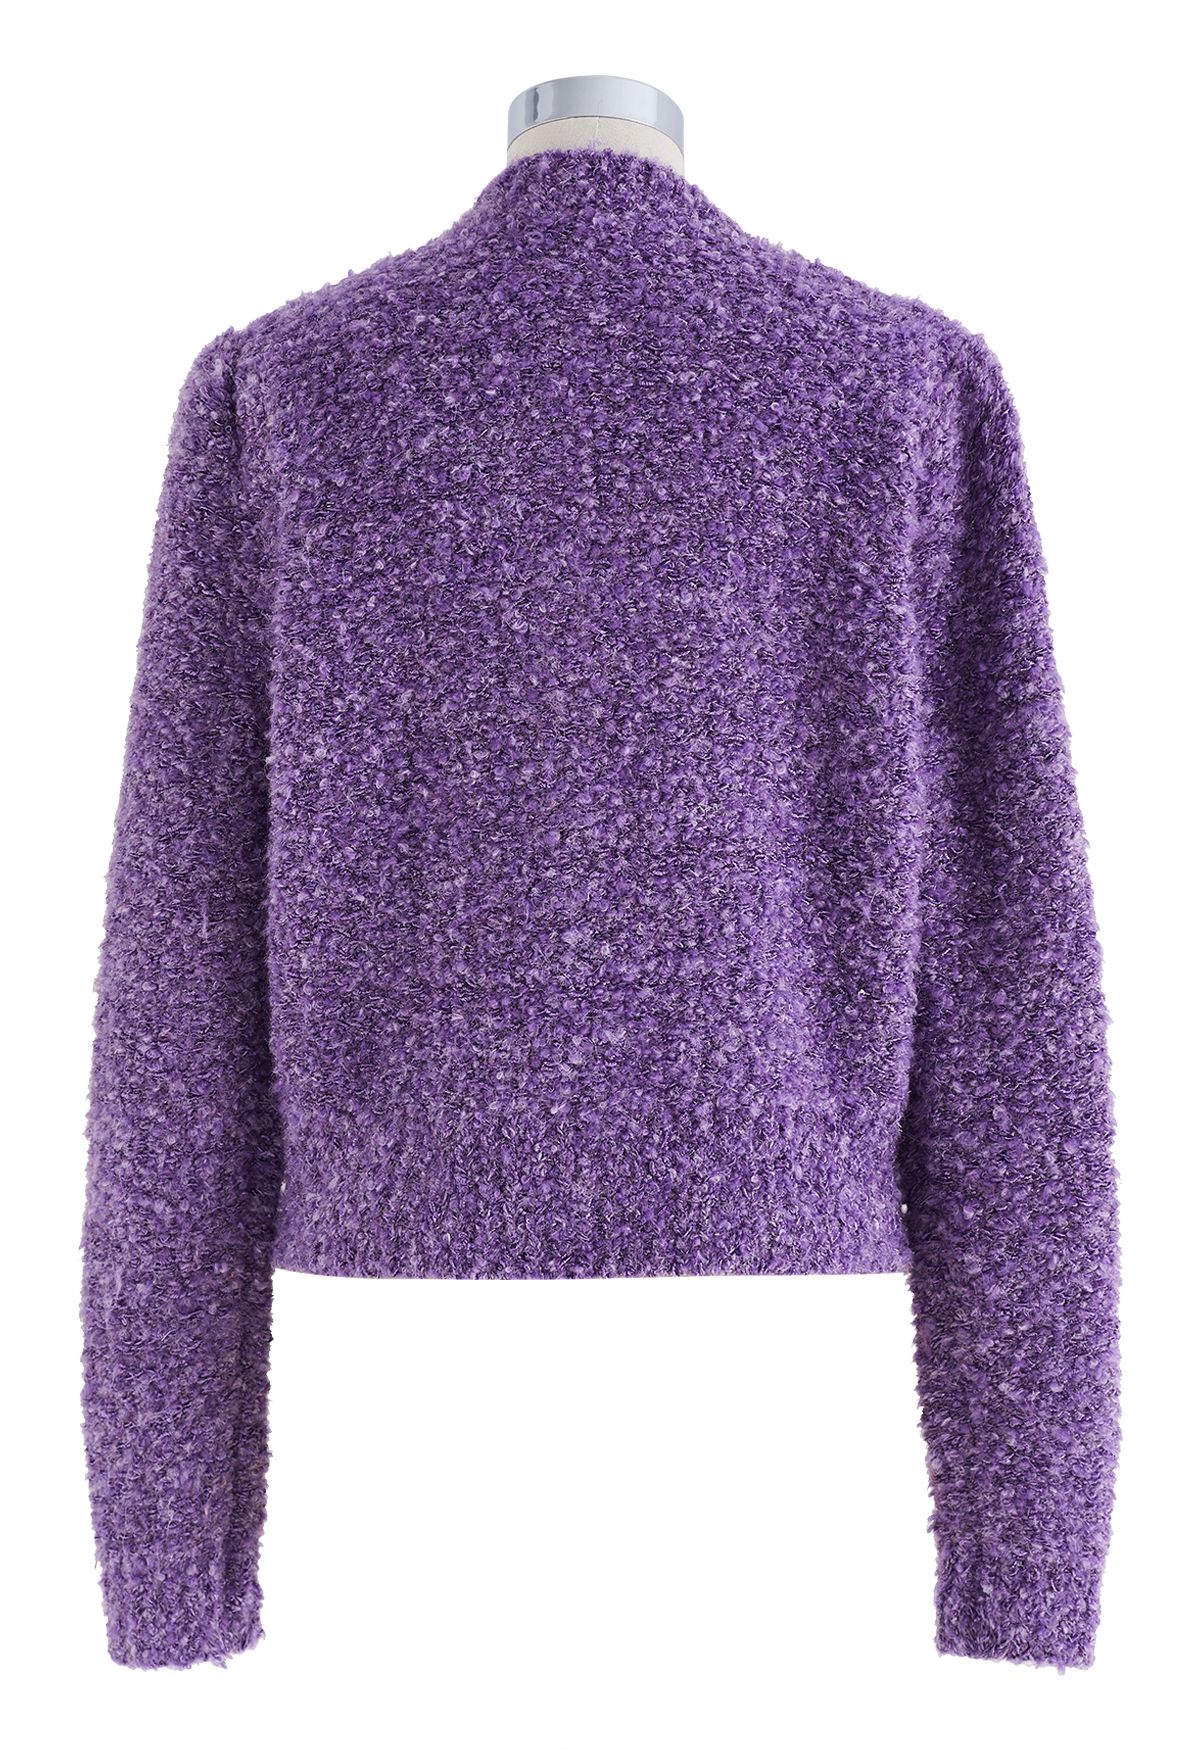 Pearly Button Shimmer Fuzzy Crop Cardigan in Purple